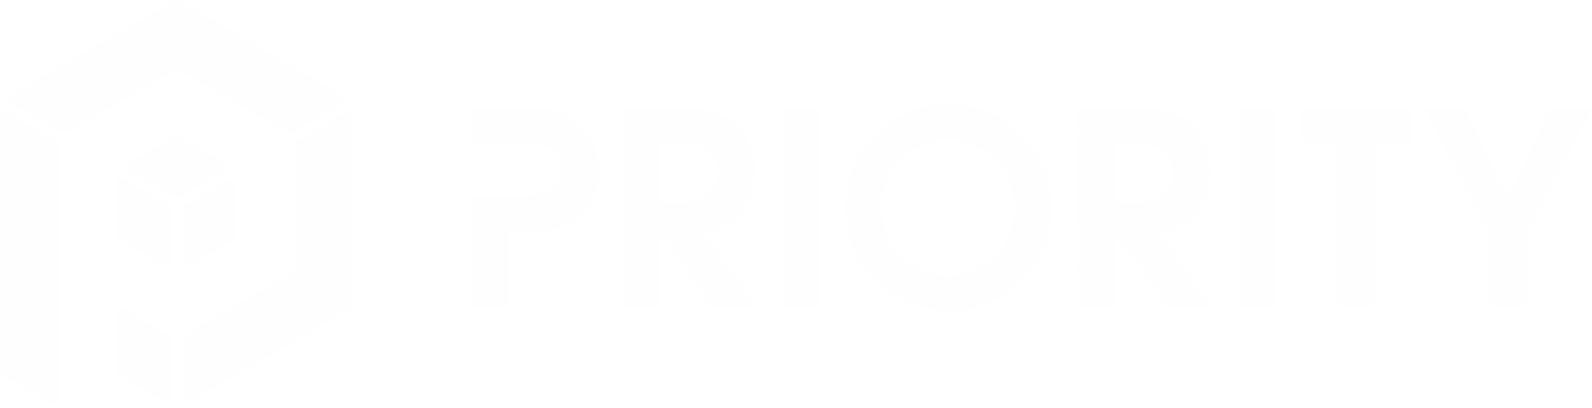 Priority Technology Holdings
 logo large for dark backgrounds (transparent PNG)